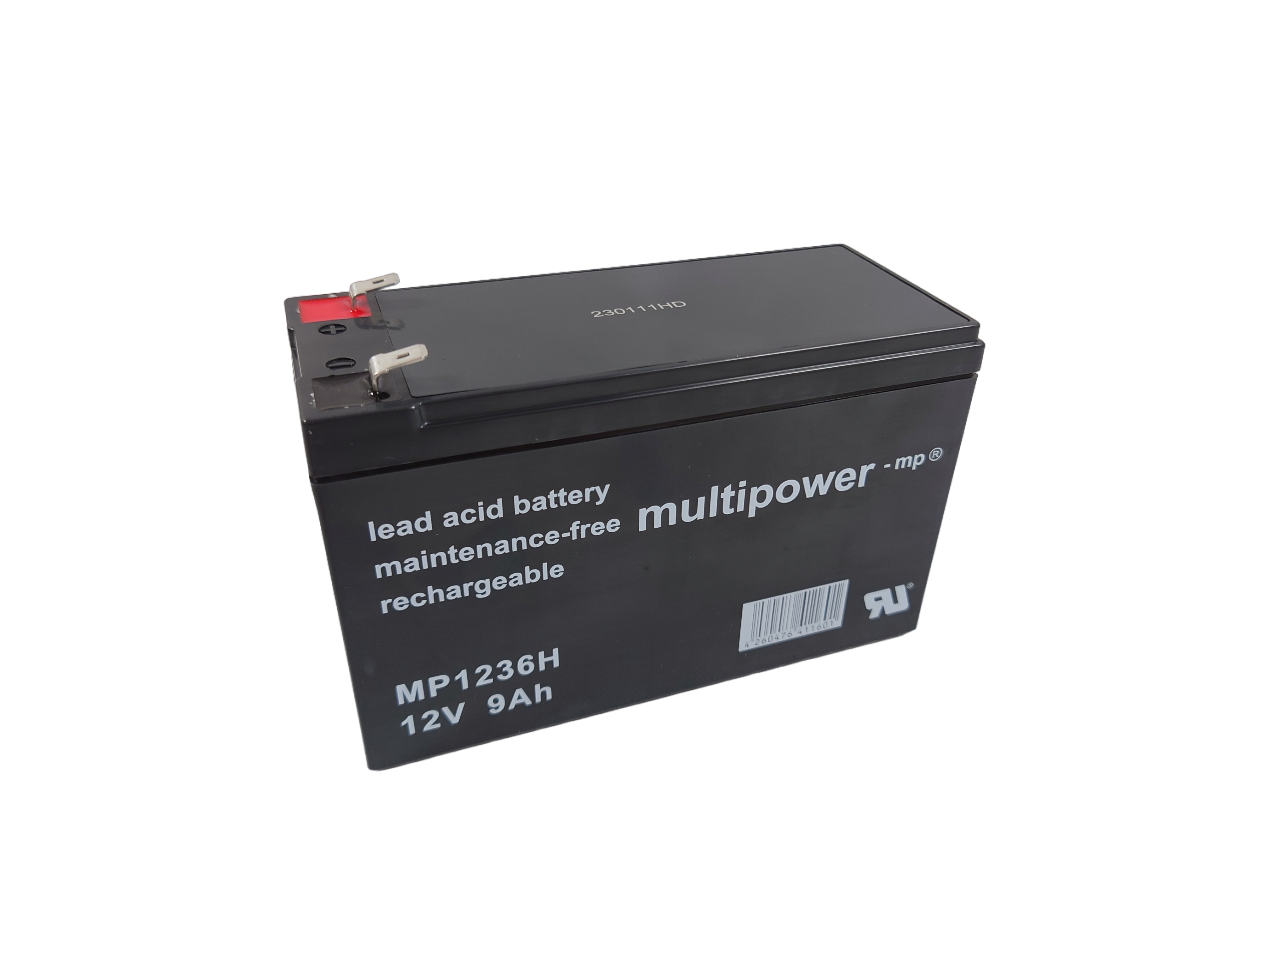 Multipower MP 1236H VdS